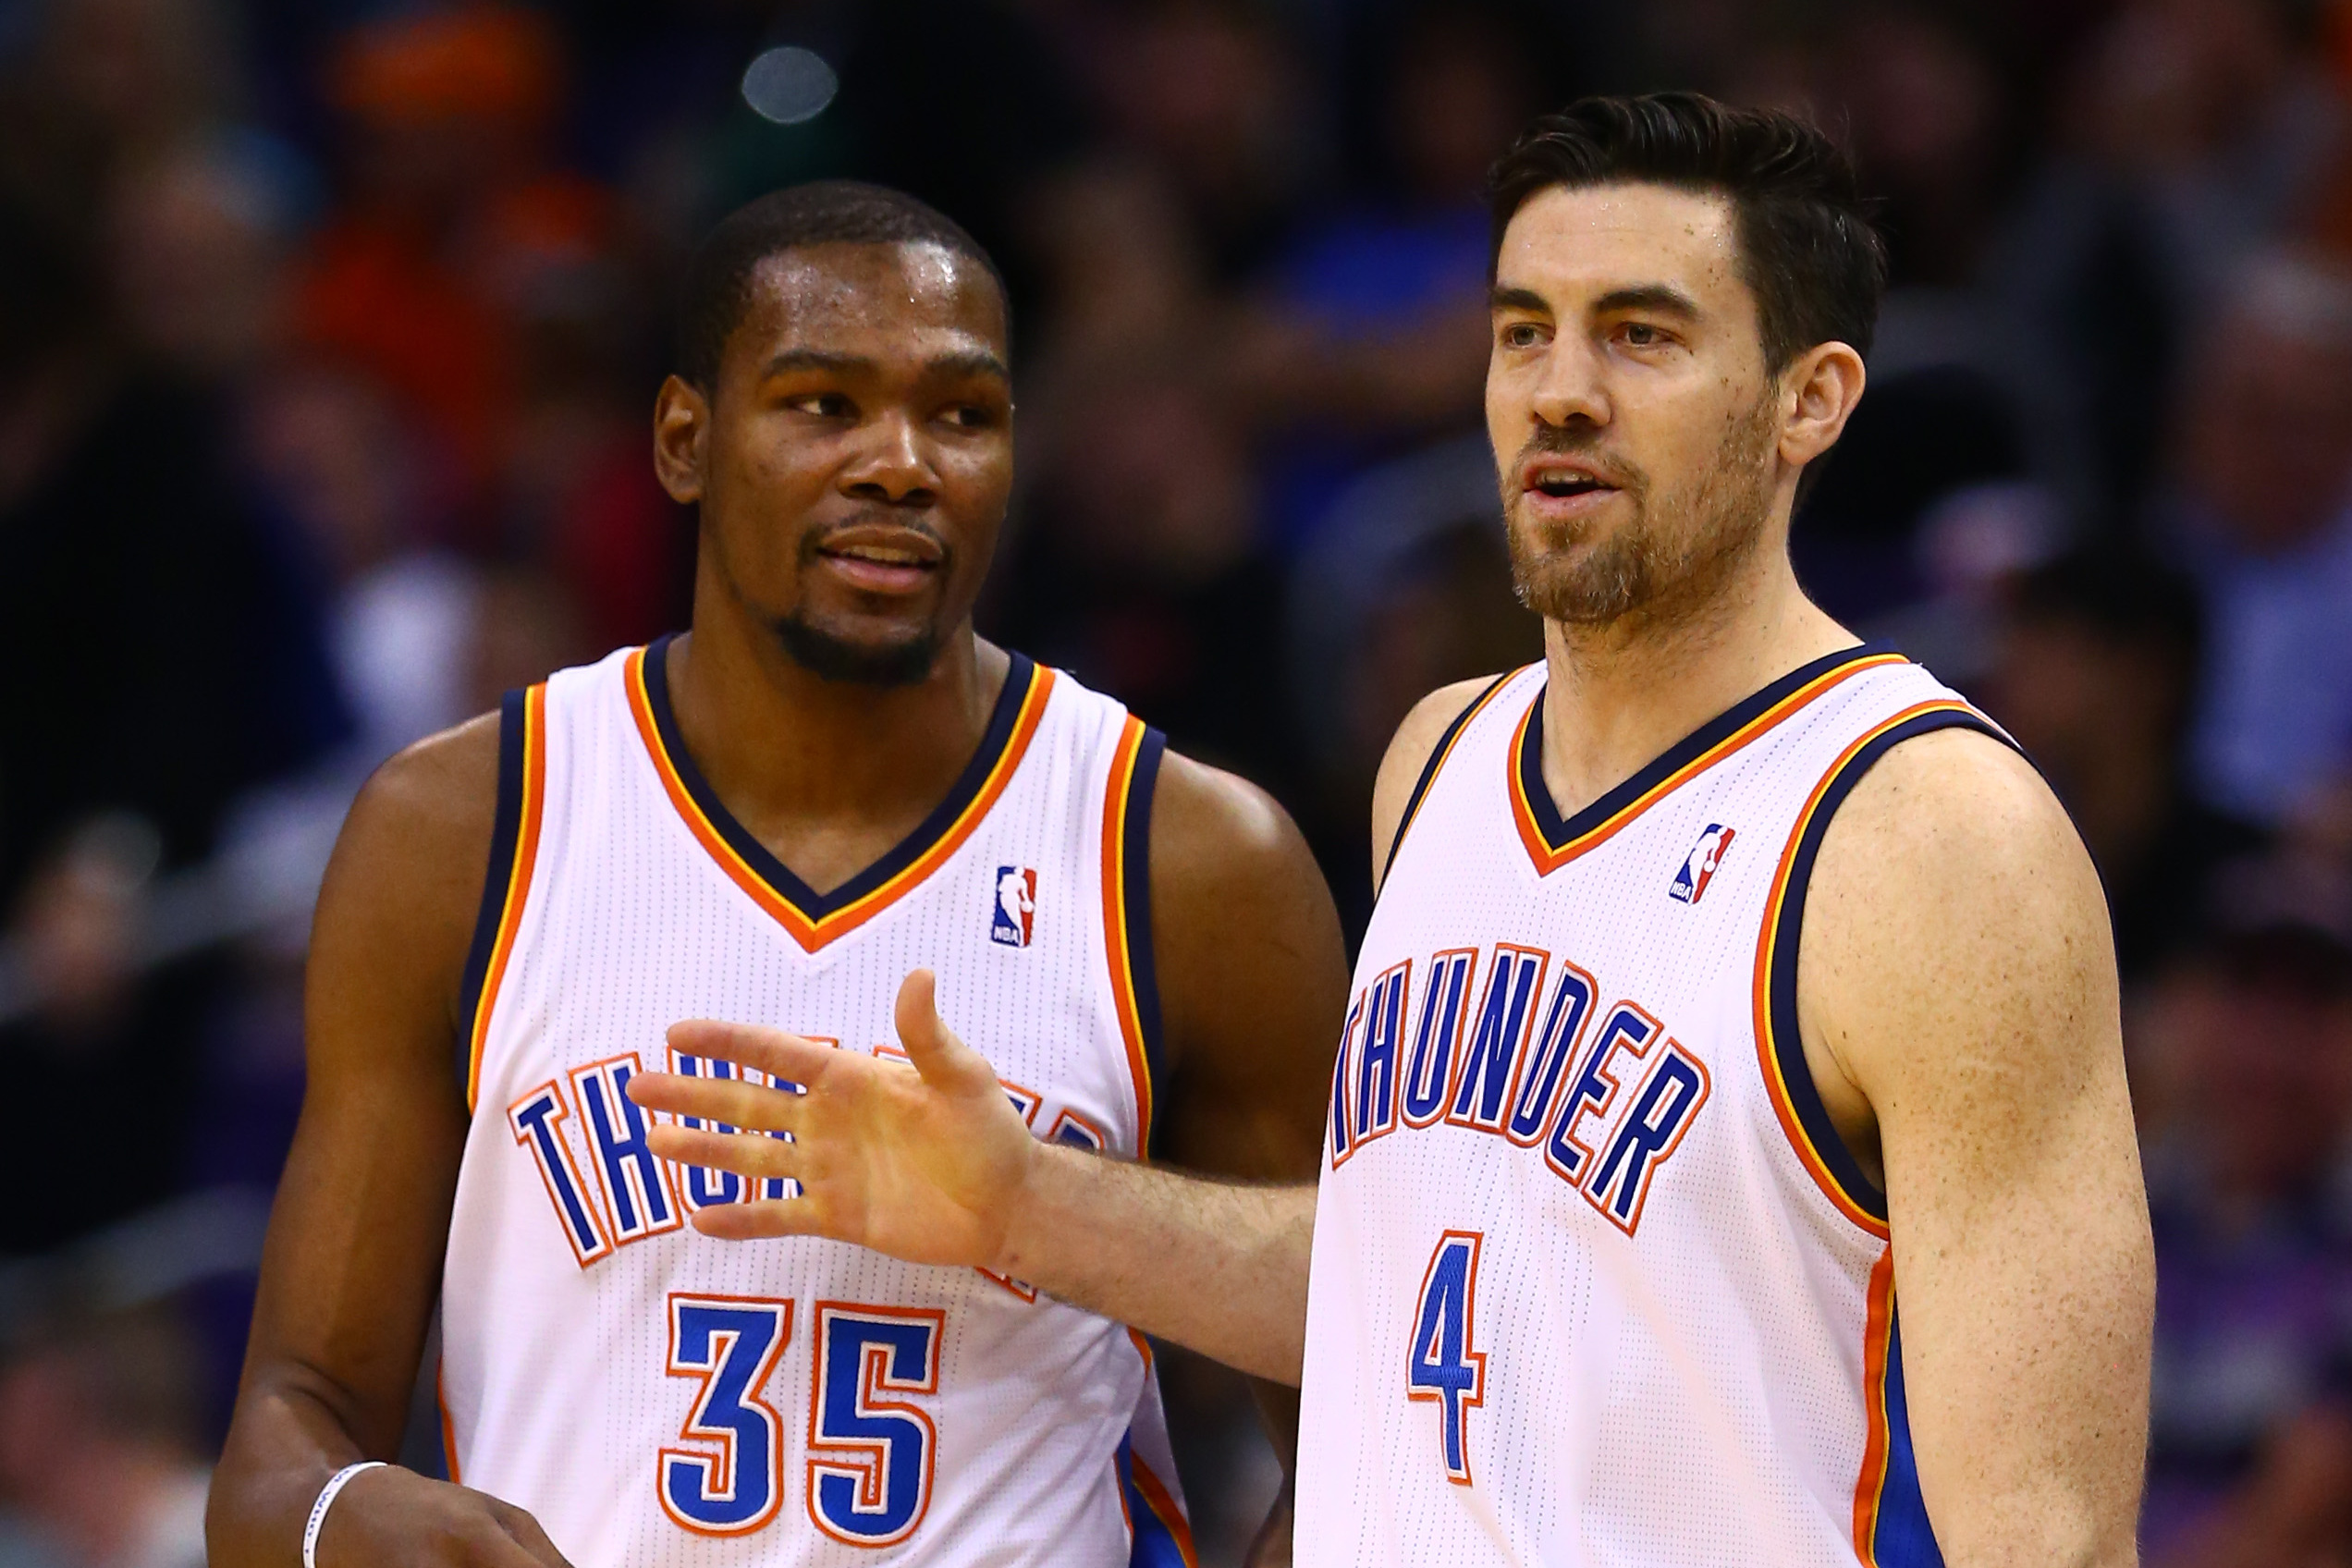 Nick Collison Pens Column and Reveals What It's Like to Play with